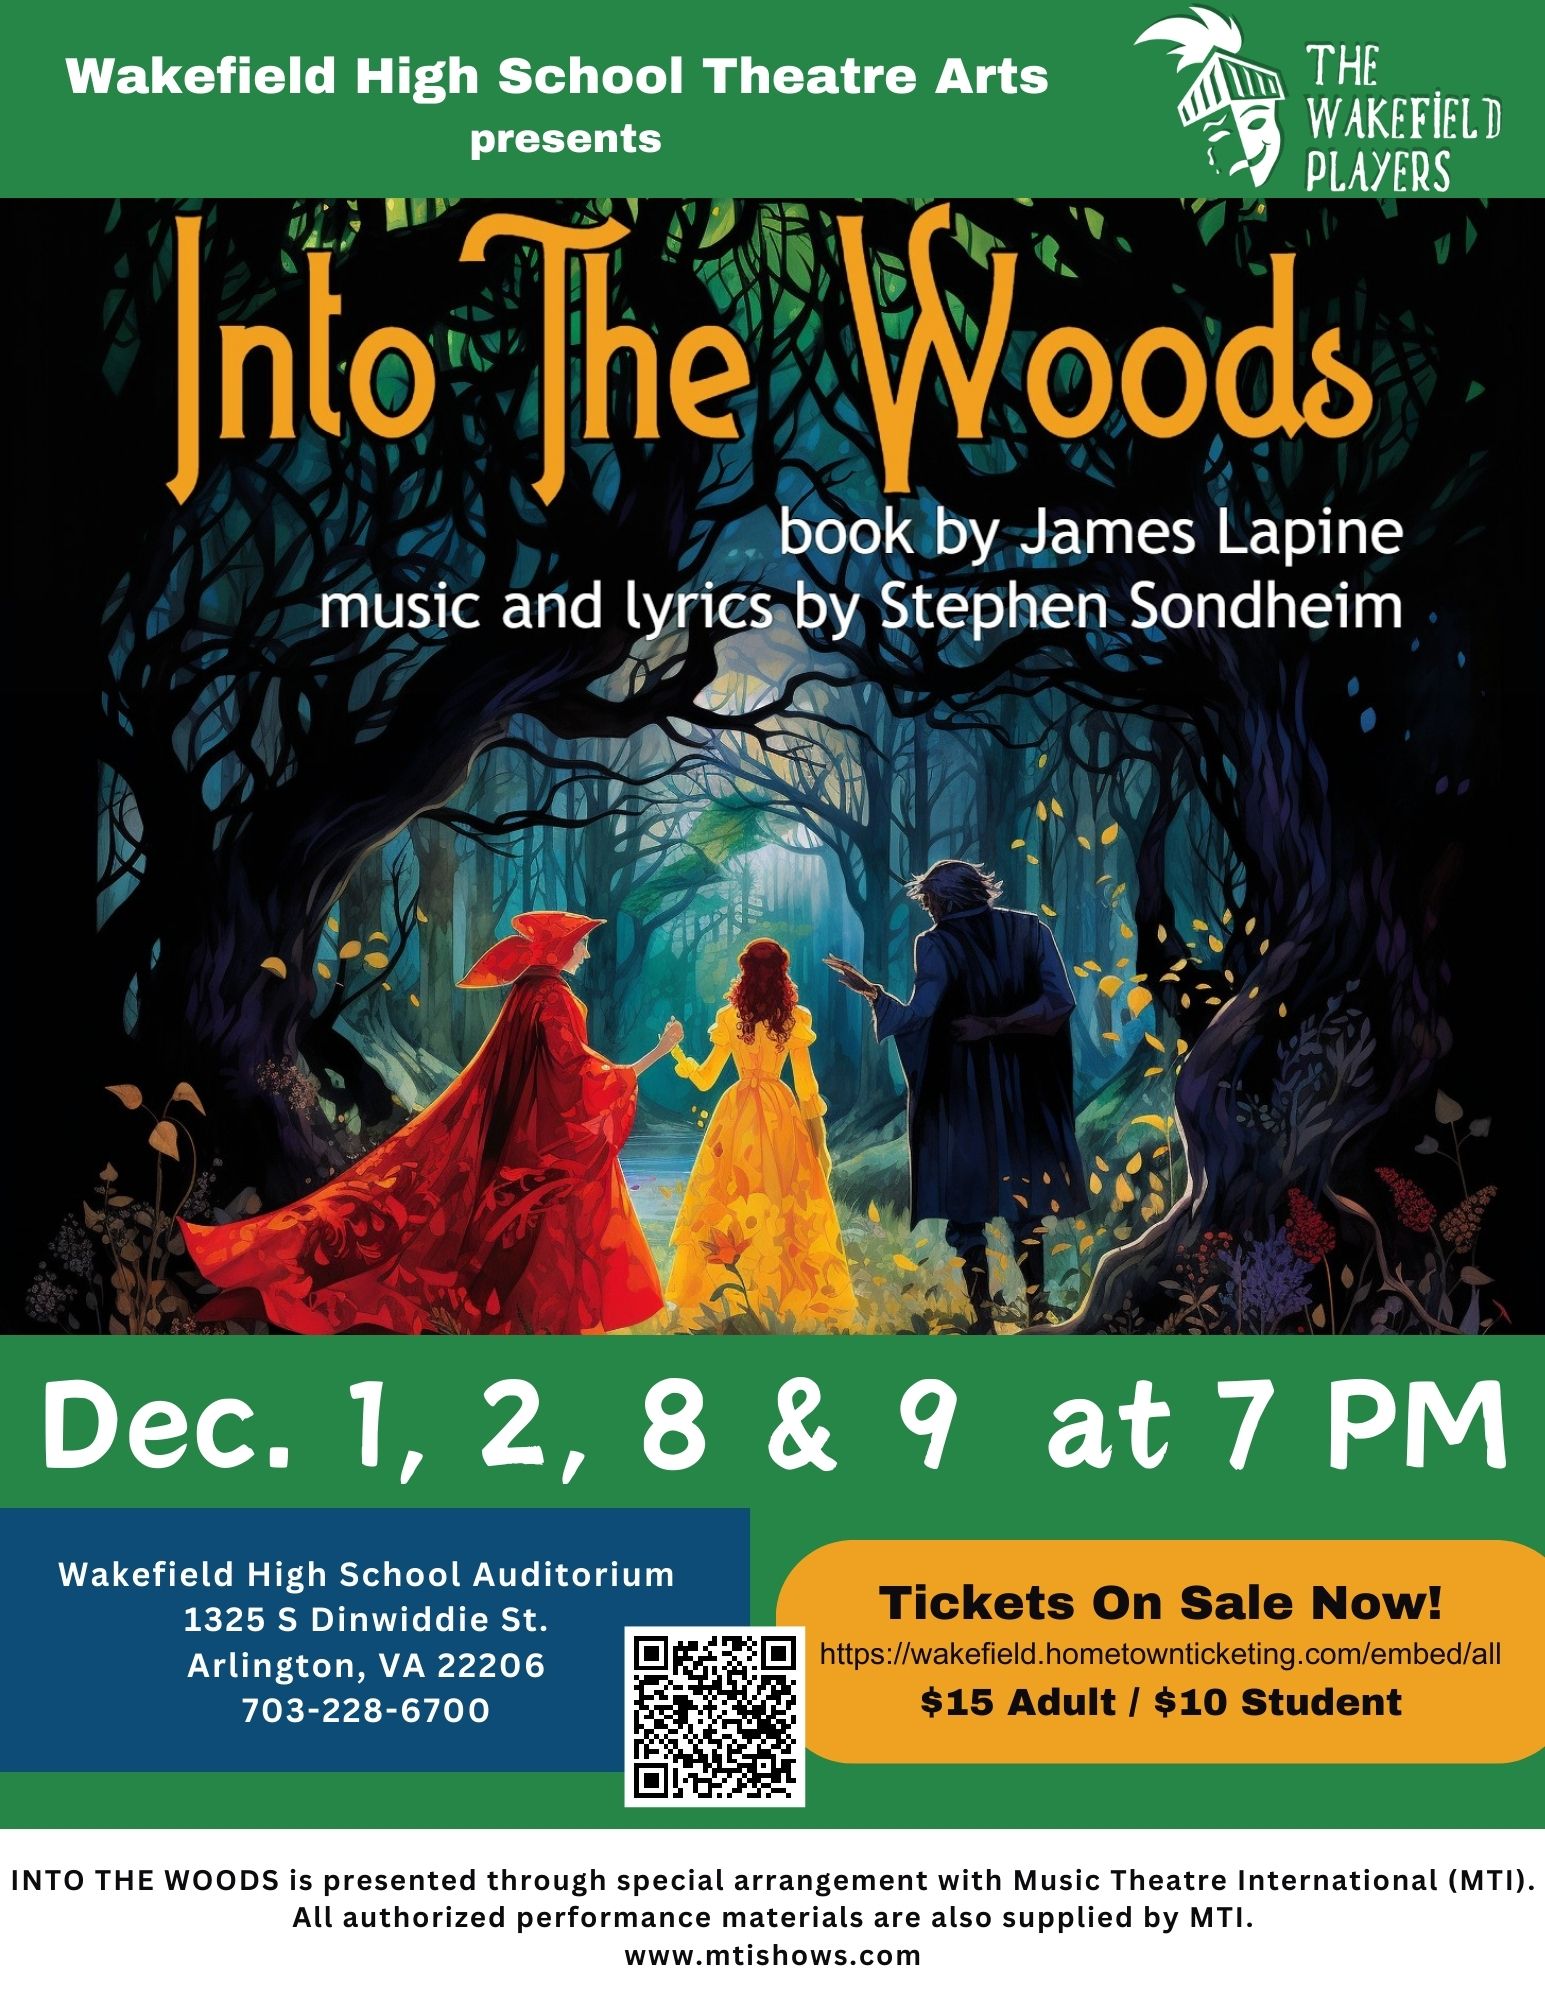 Into The Woods Flyer with QR Code for ticket purchase